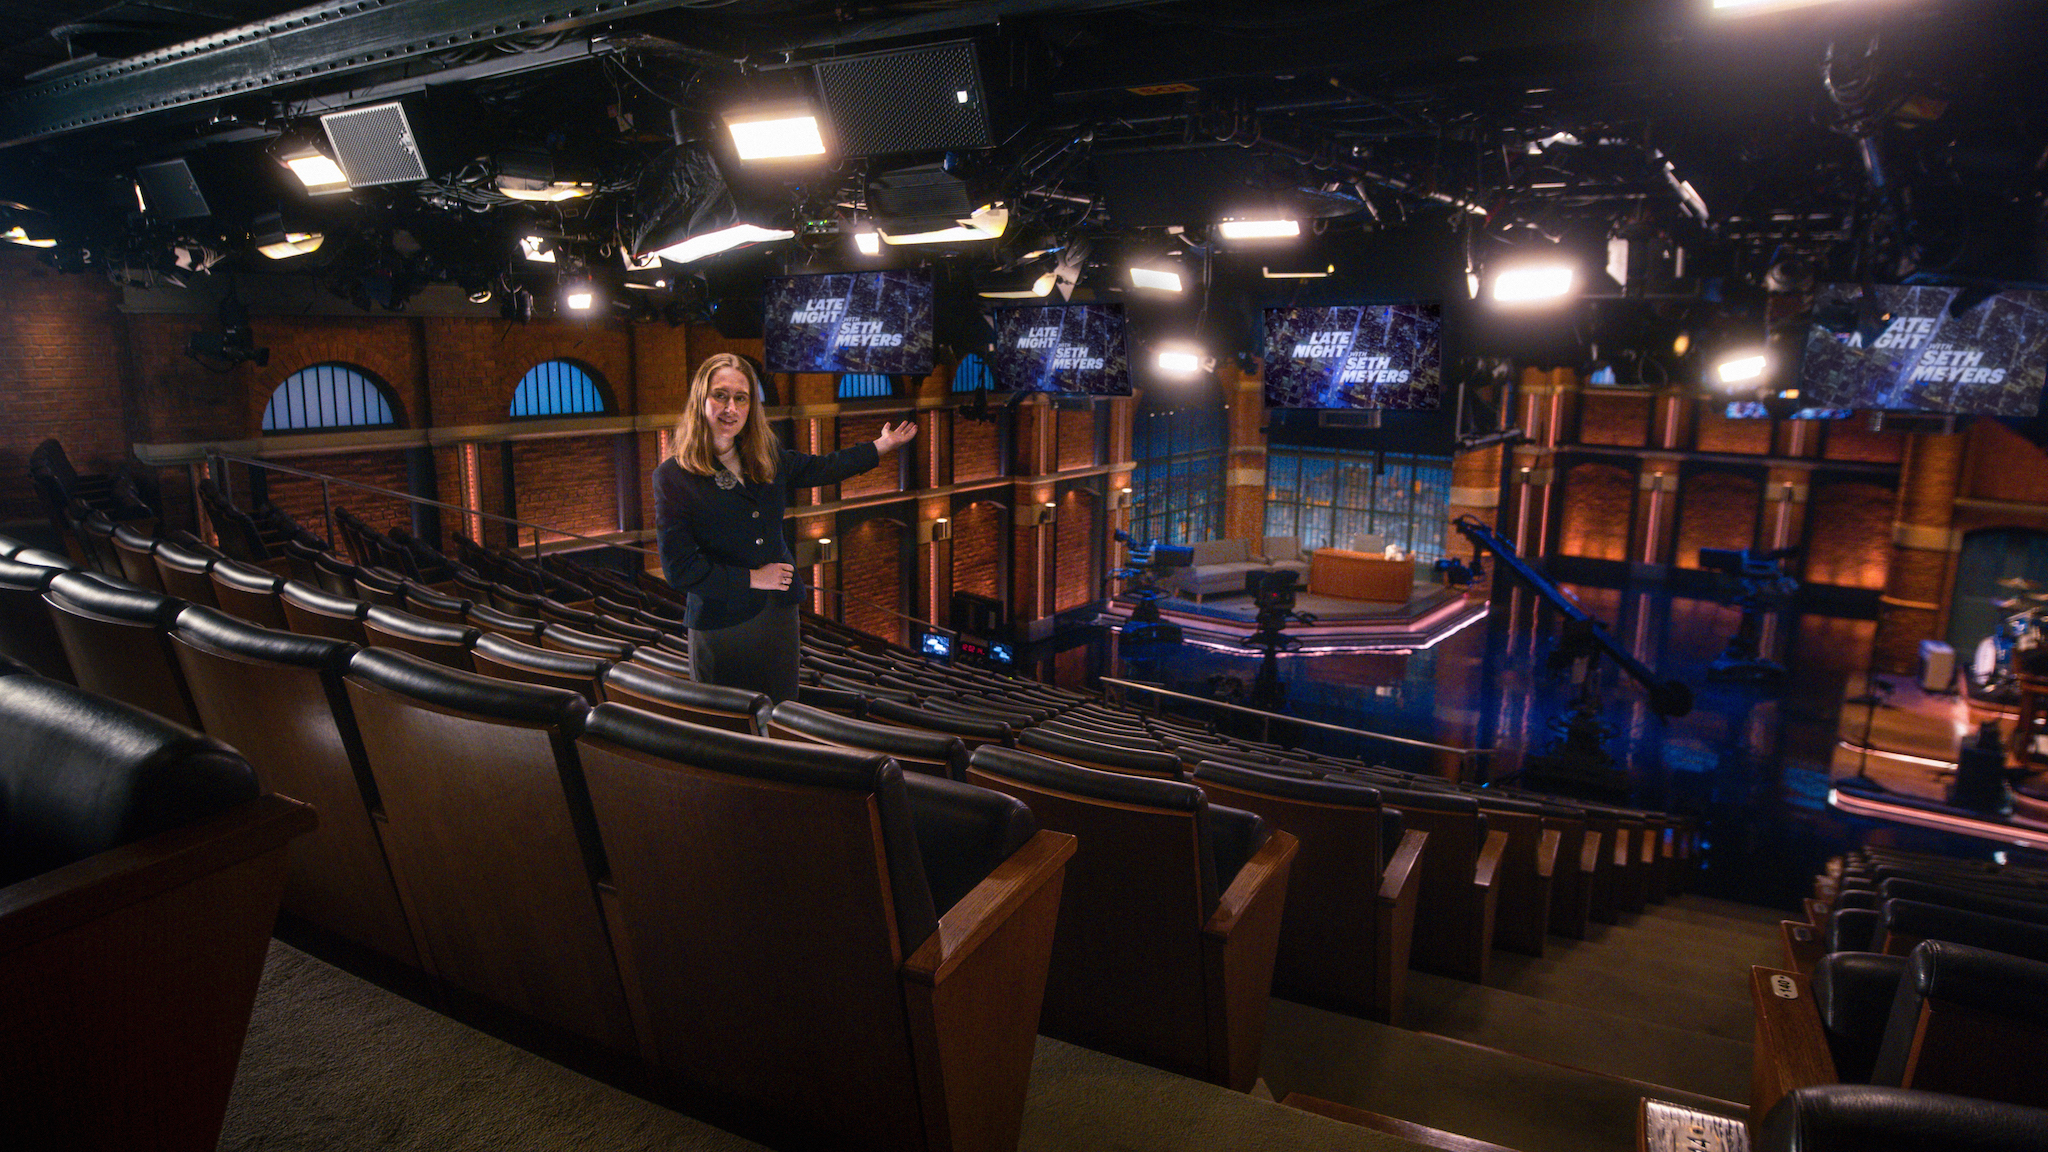 The stage where Late Night with Seth Meyers is filmed.